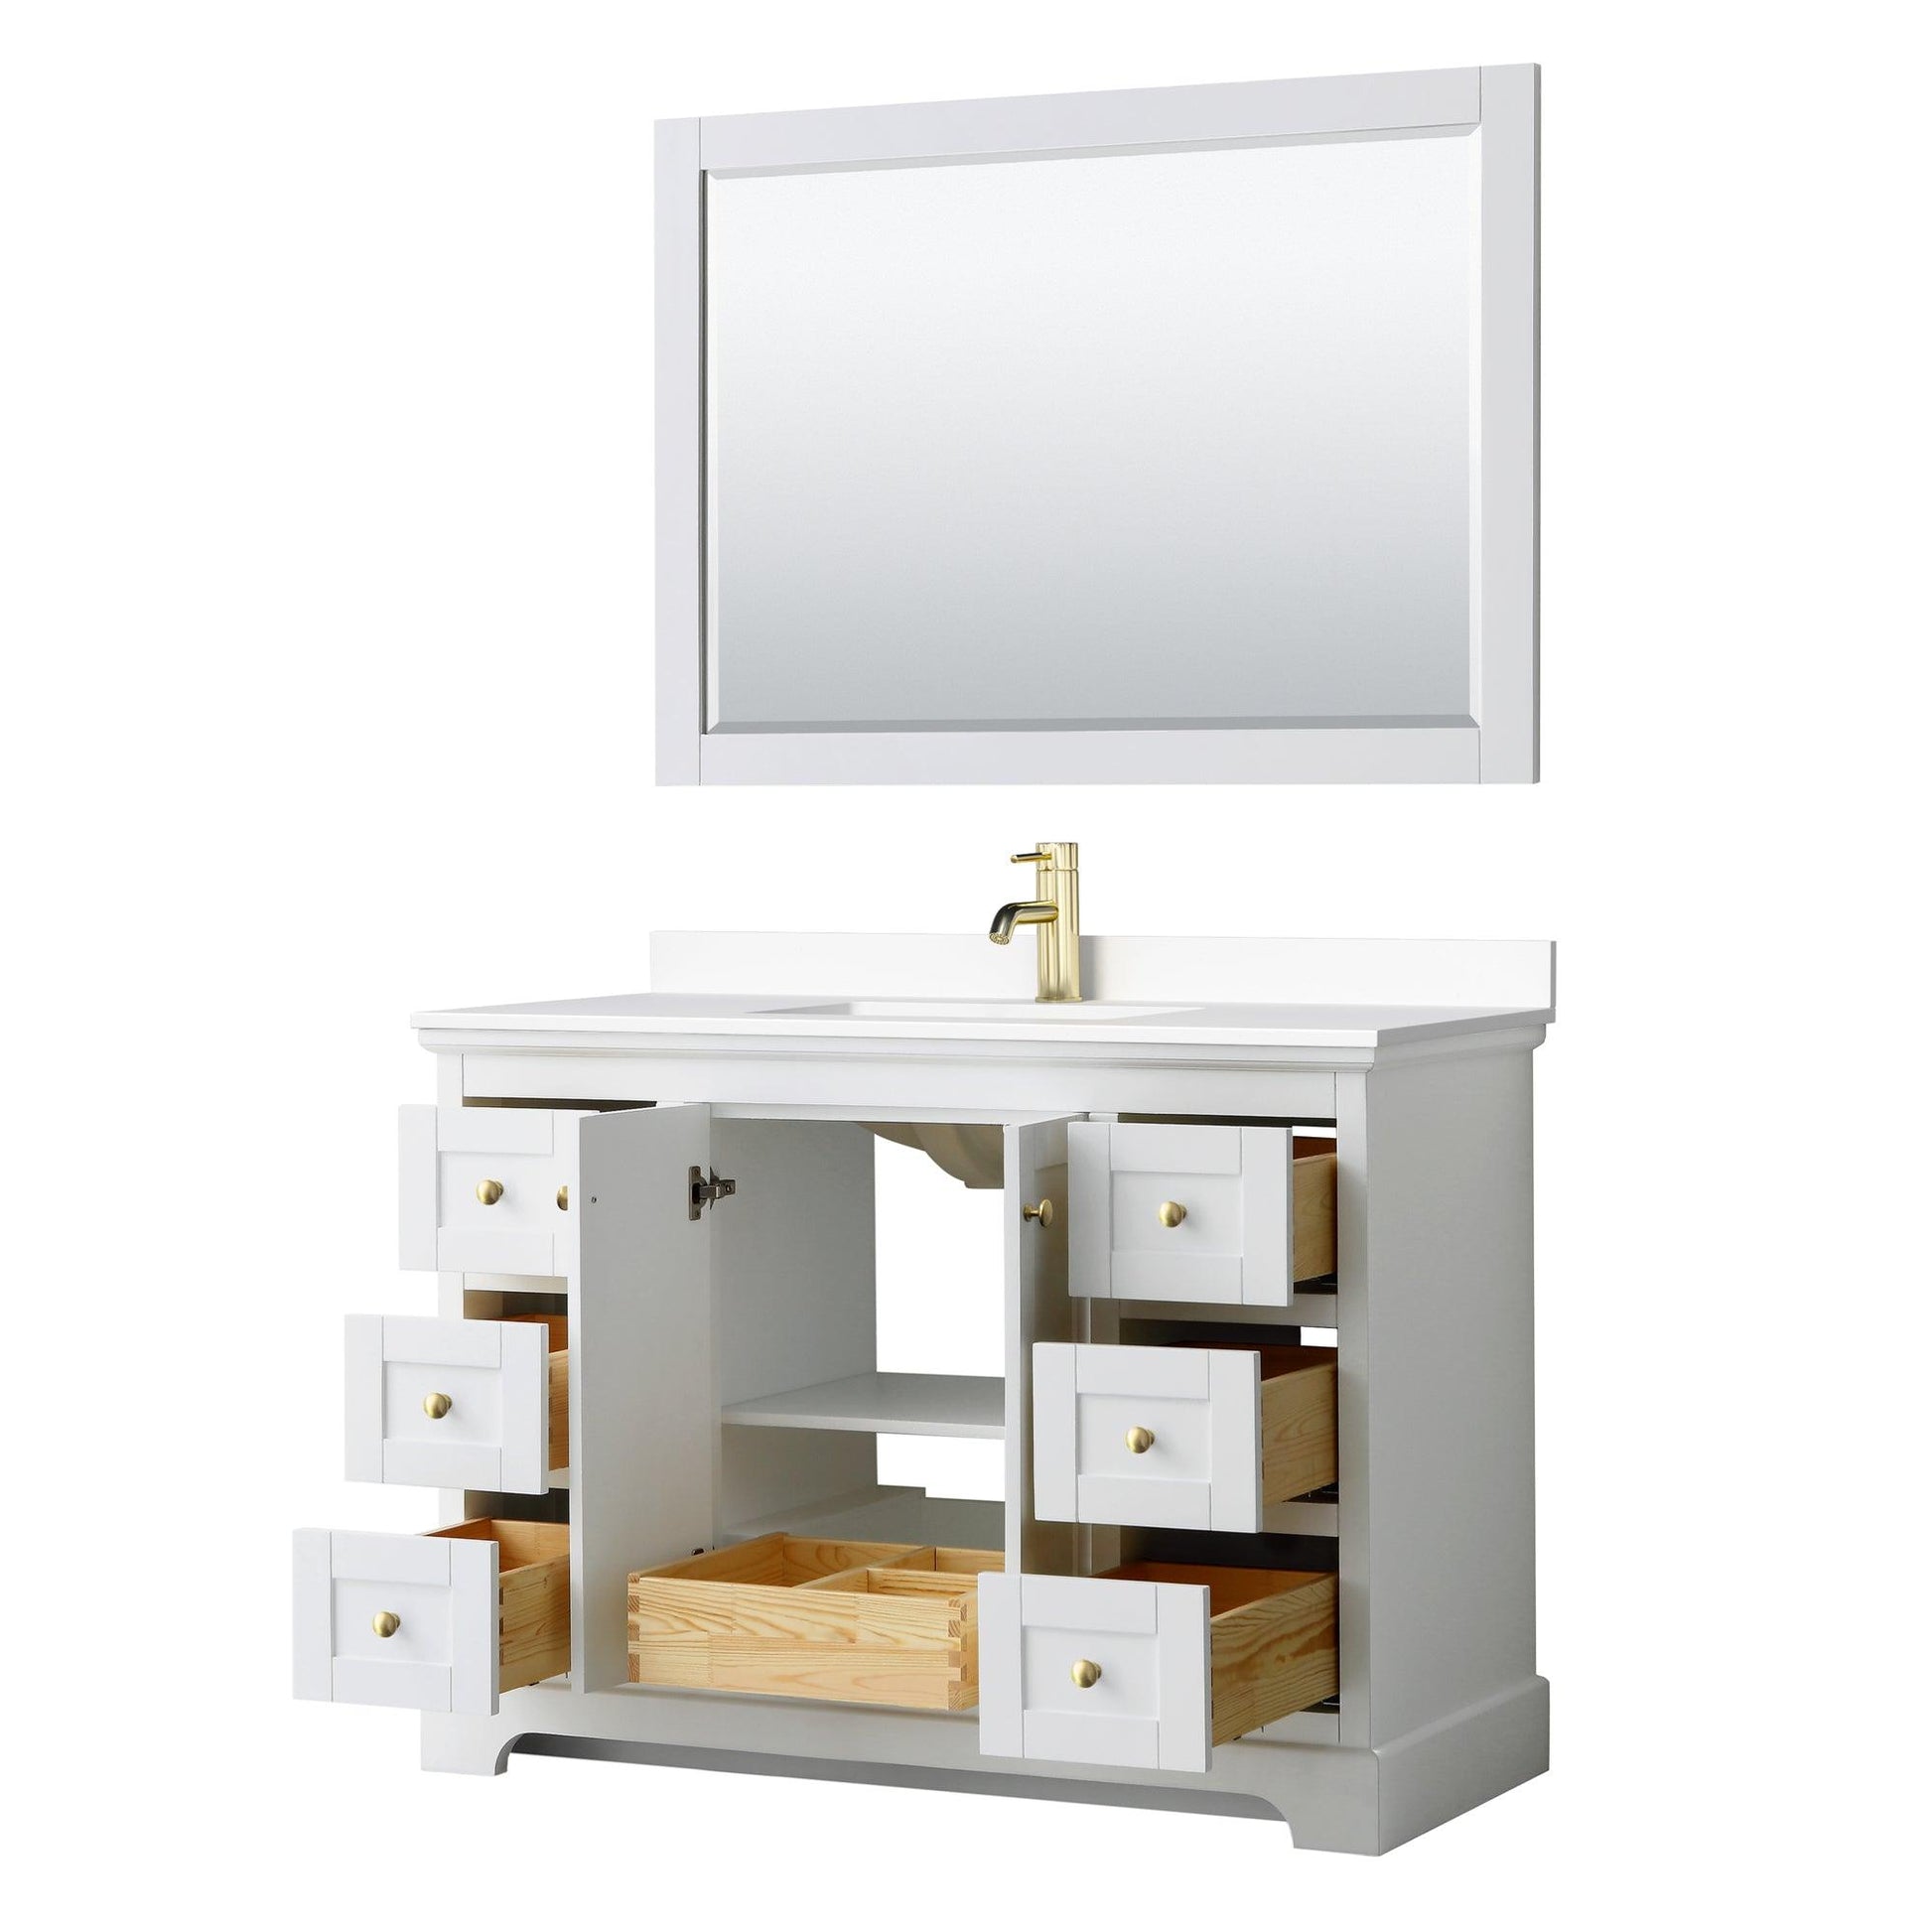 
  
  Wyndham Collection Avery Single Bathroom Vanity in White, White Cultured Marble Countertop, Undermount Square Sink, Optional Mirror, Brushed Gold Trim
  
